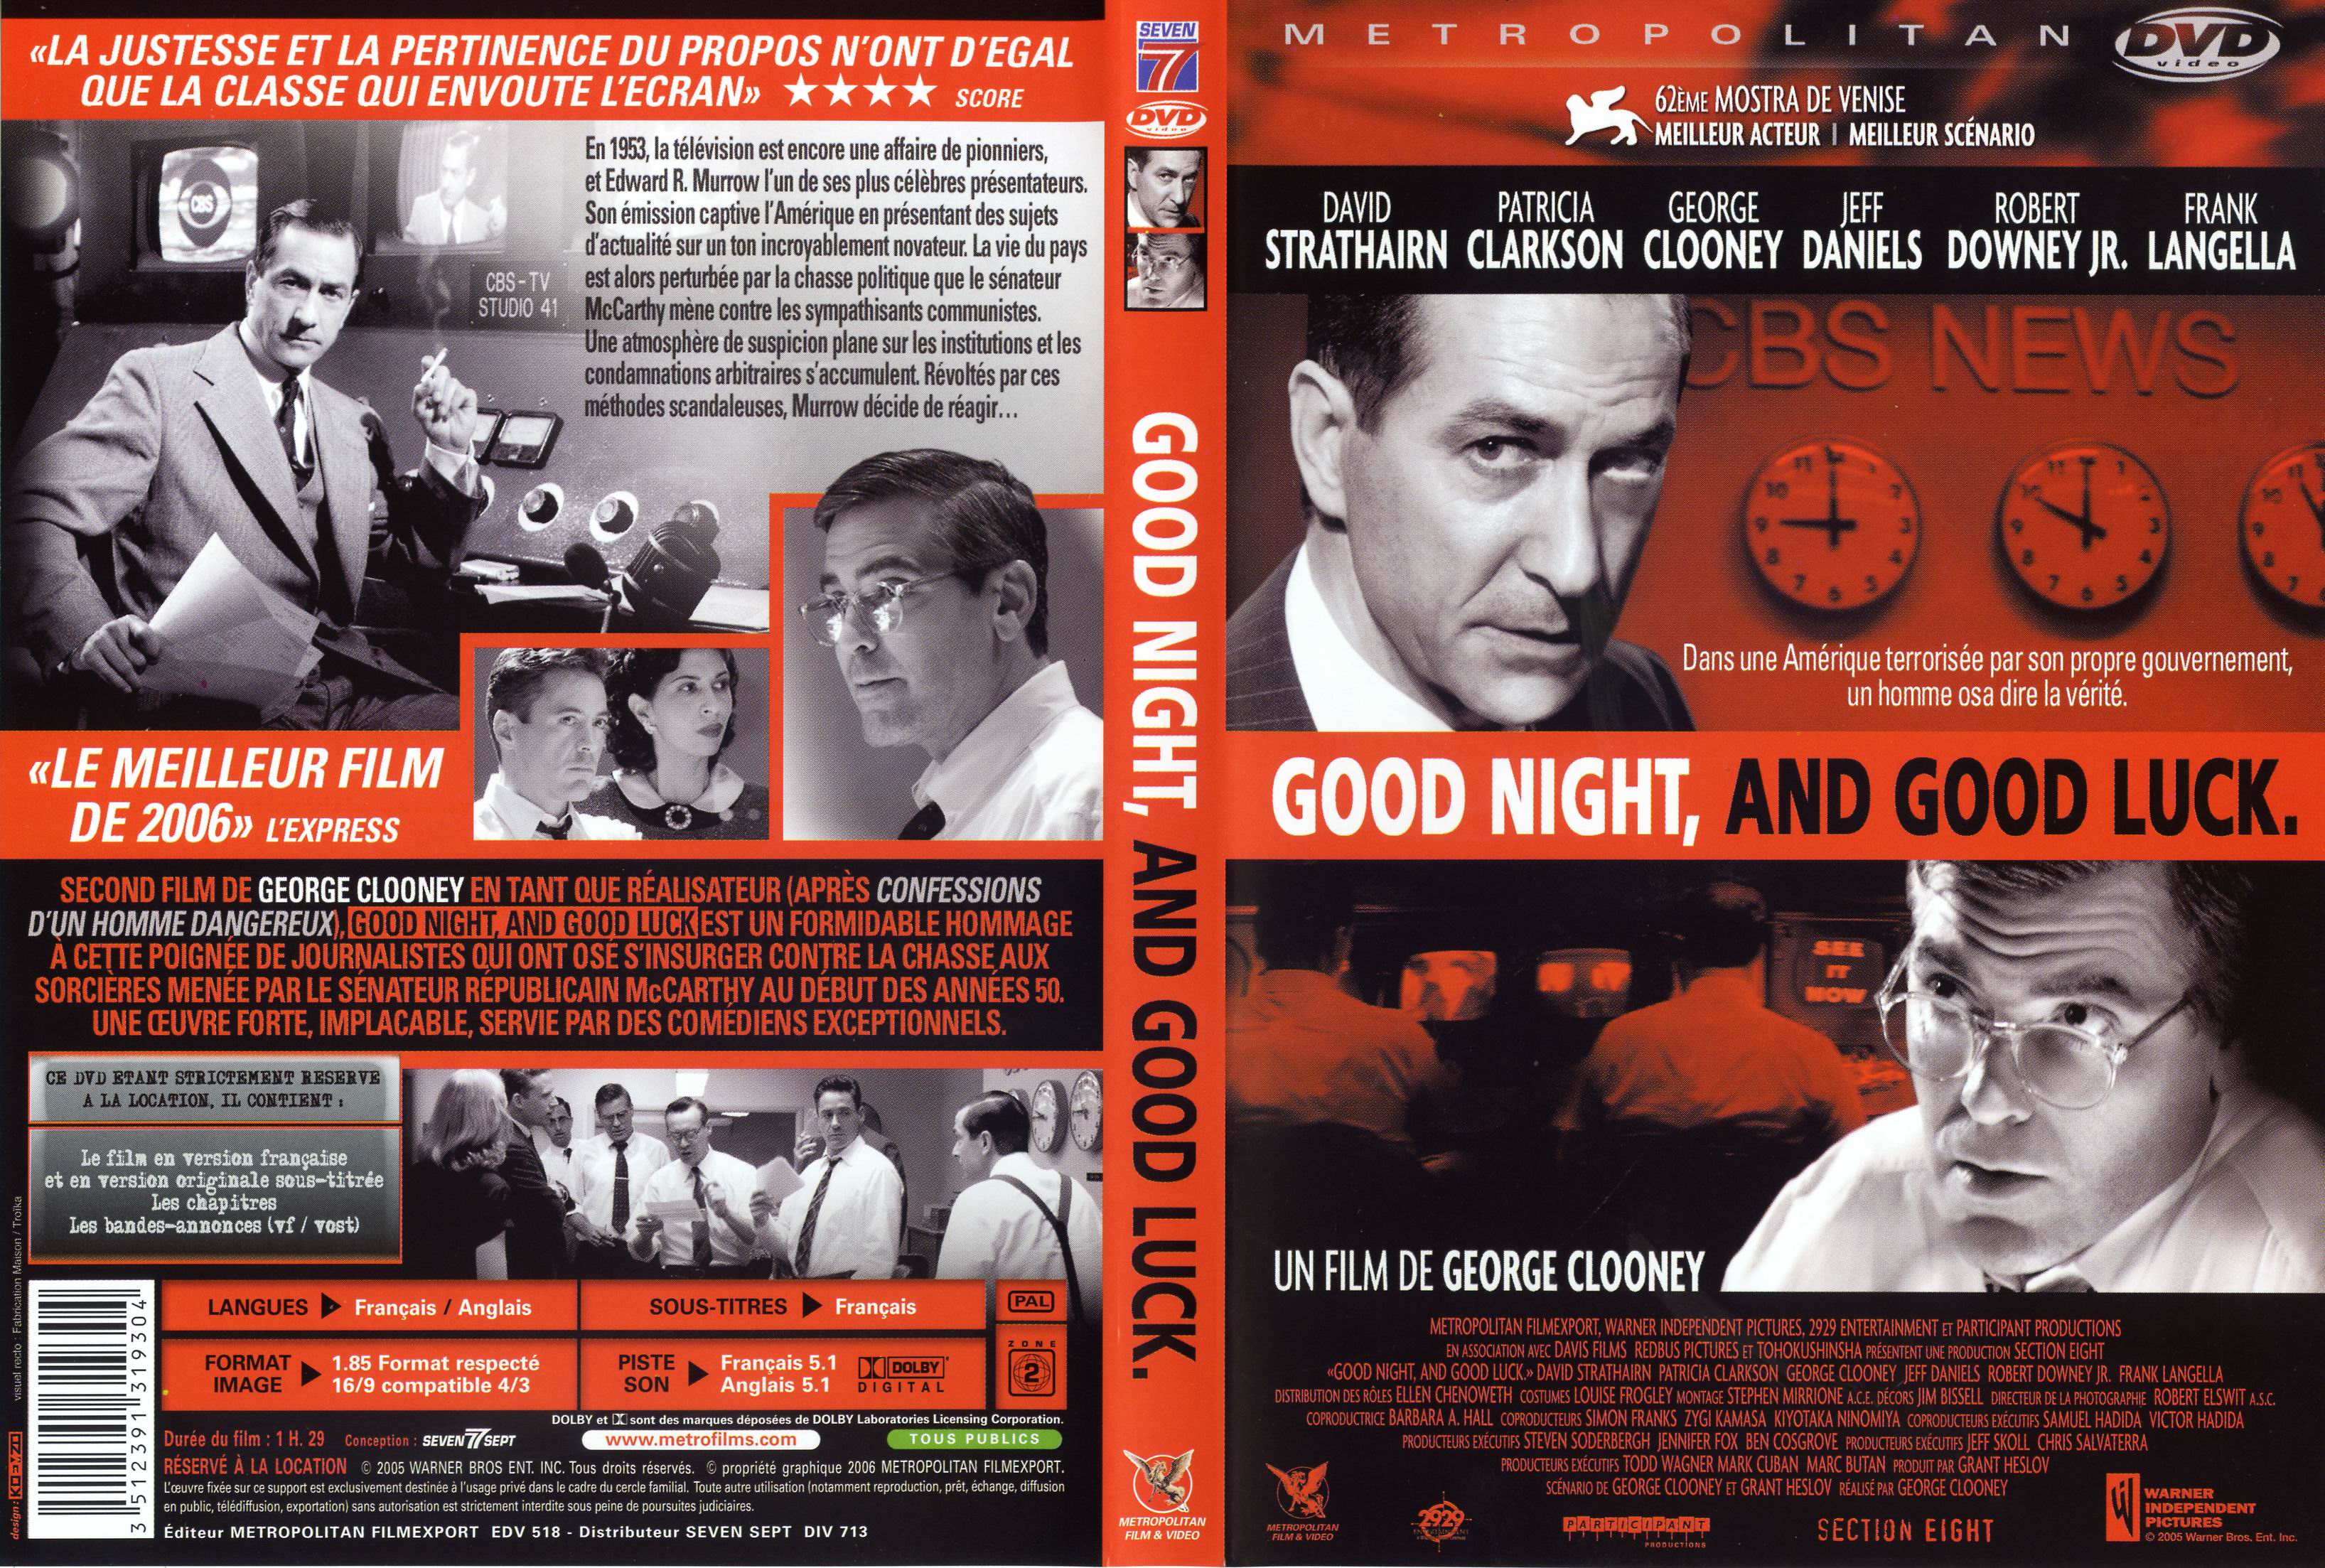 Jaquette DVD Good night and good luck